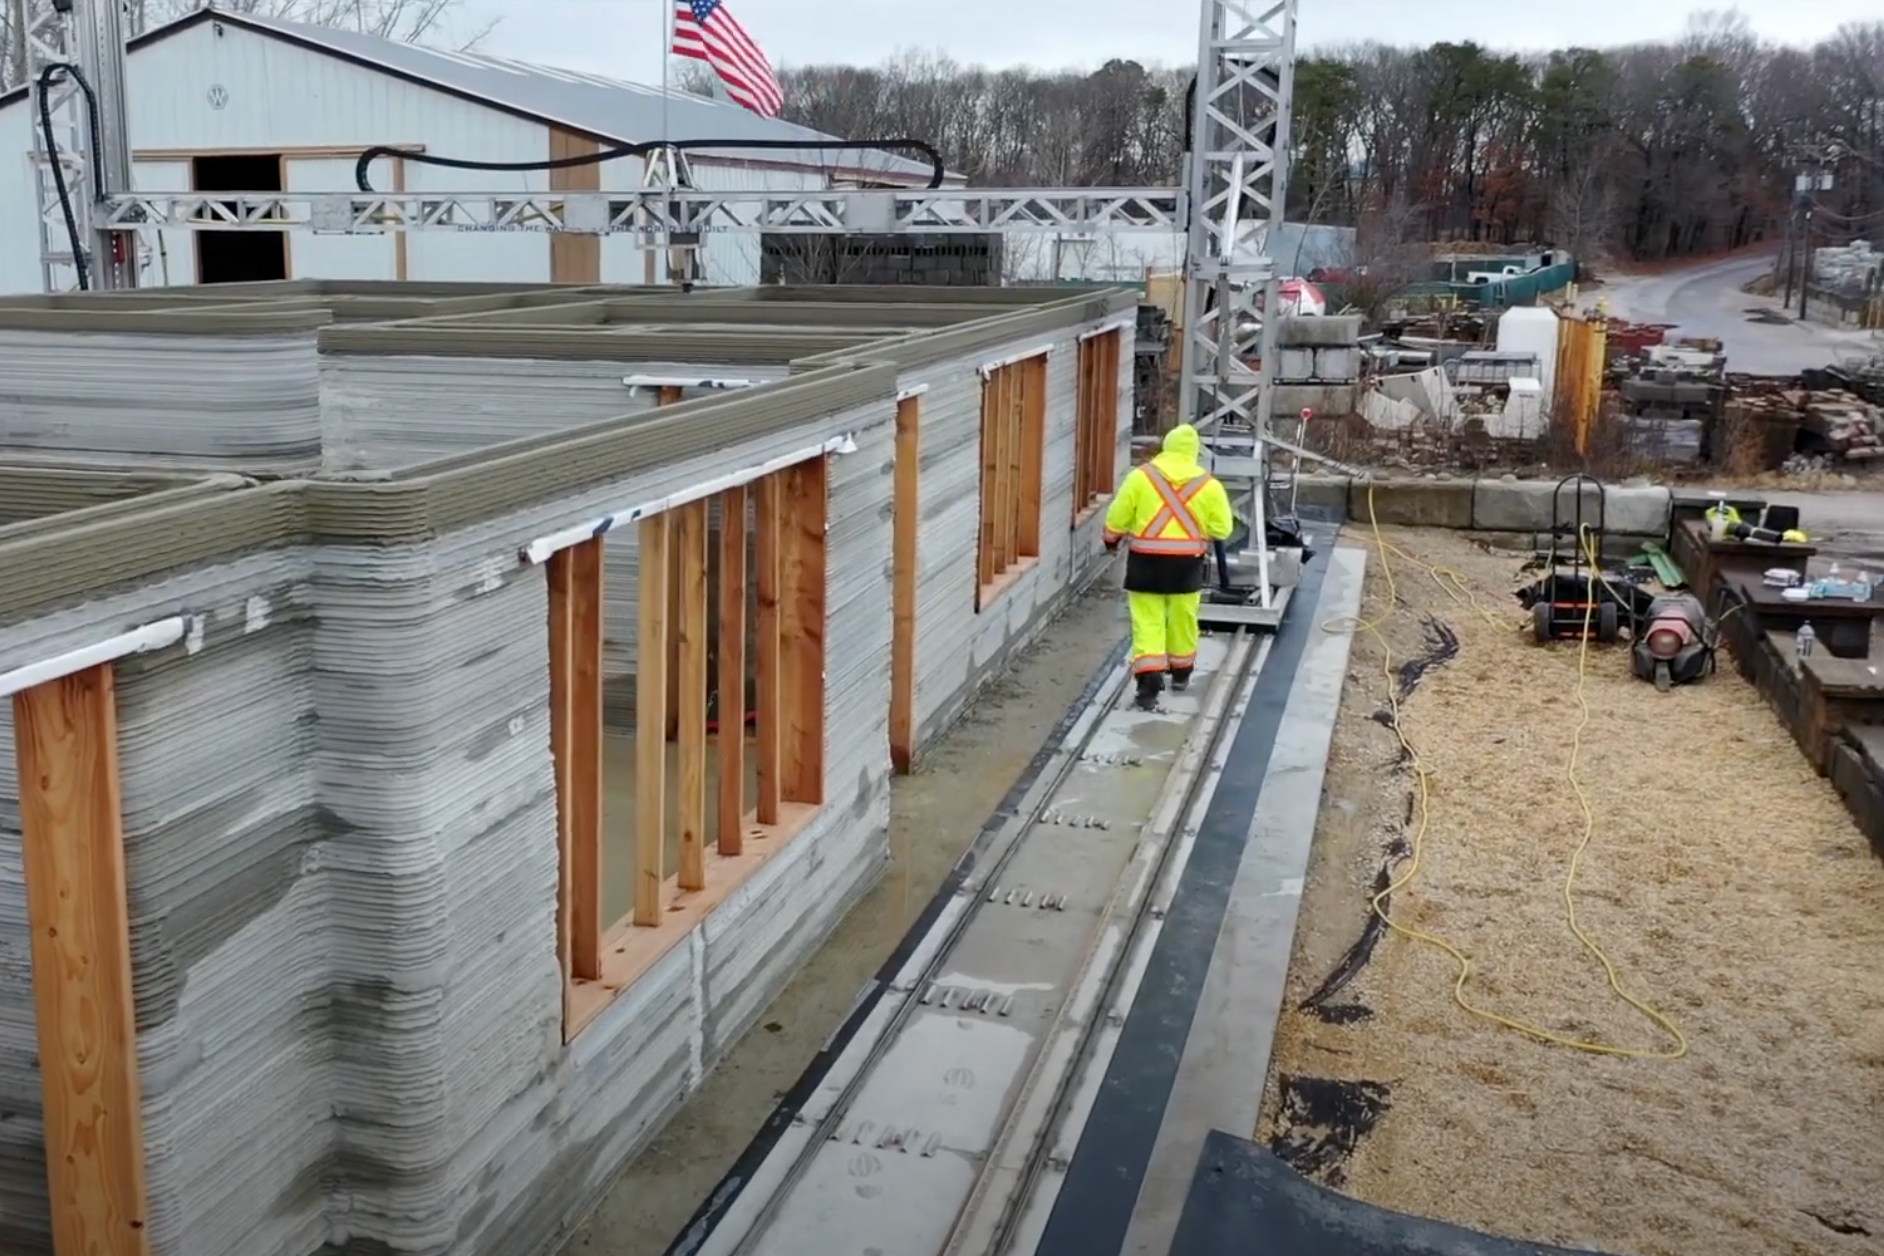 500-Square-Foot House 3D Printed in 12 Hours